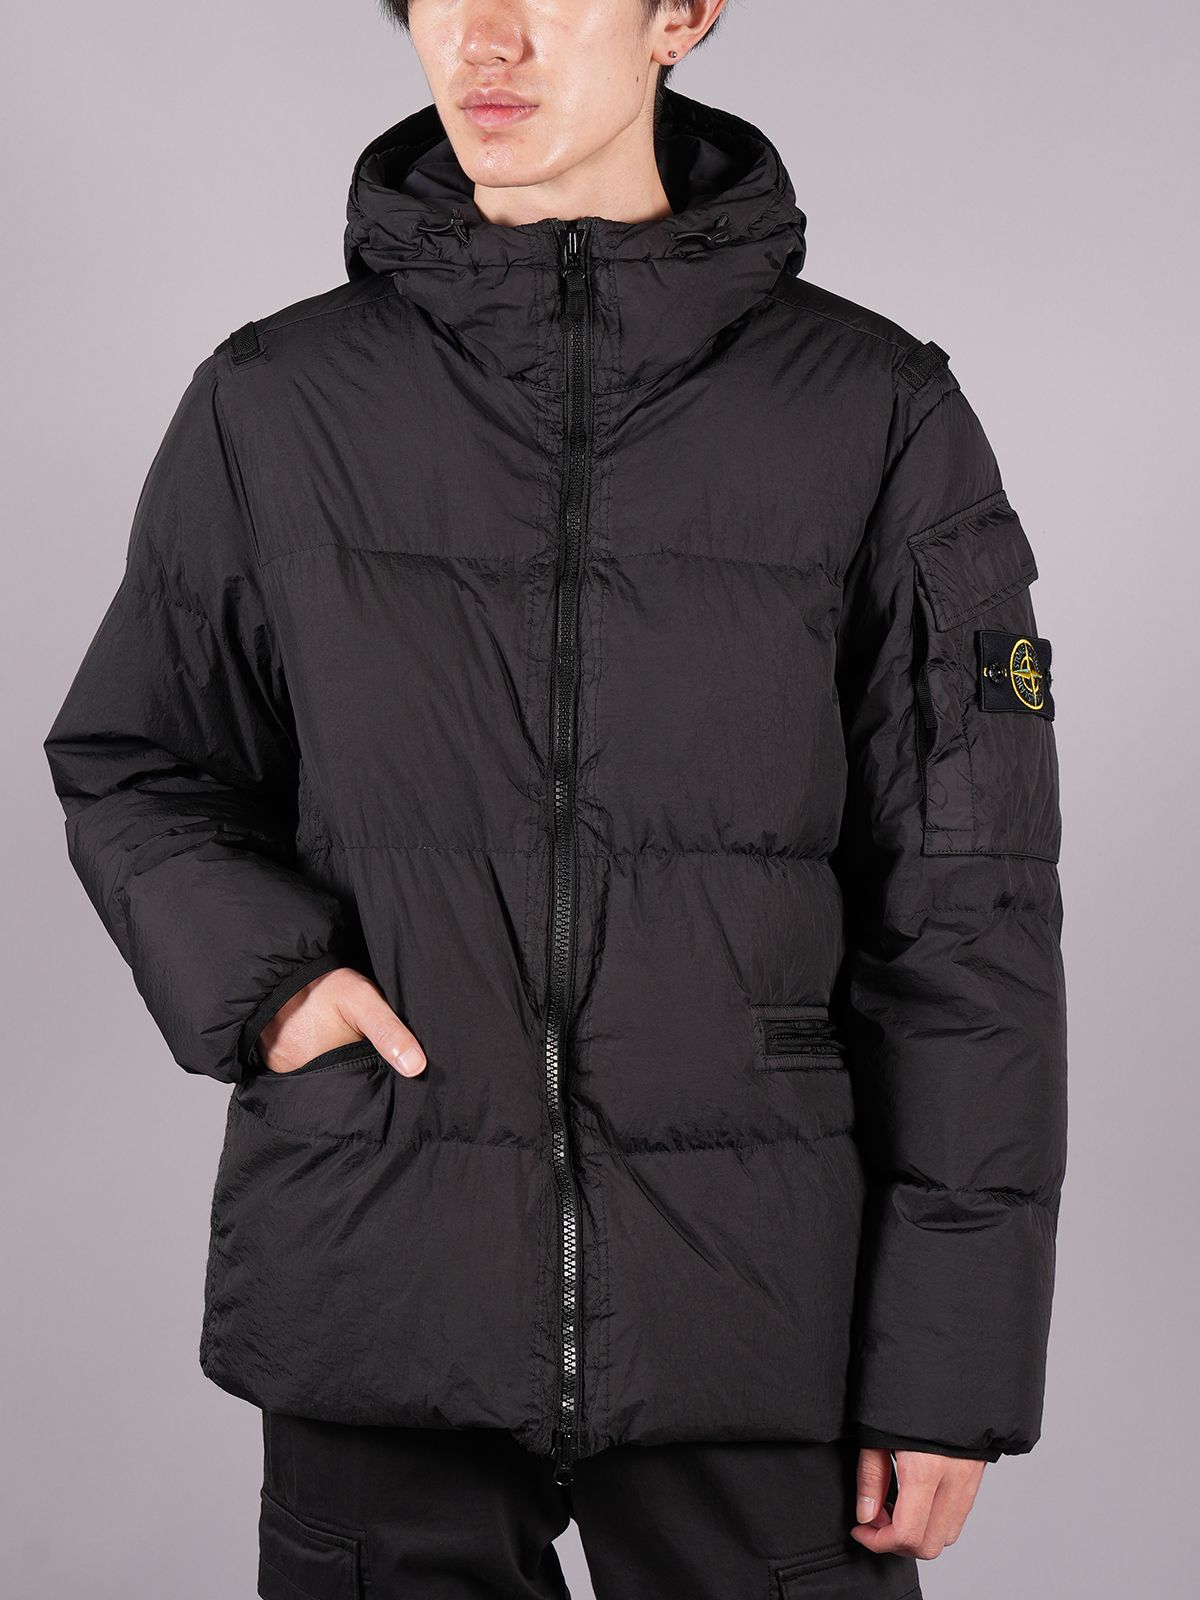 STONE ISLAND - 【ラスト1点】 GARMENT DYED CRINKLE REPS R-NY